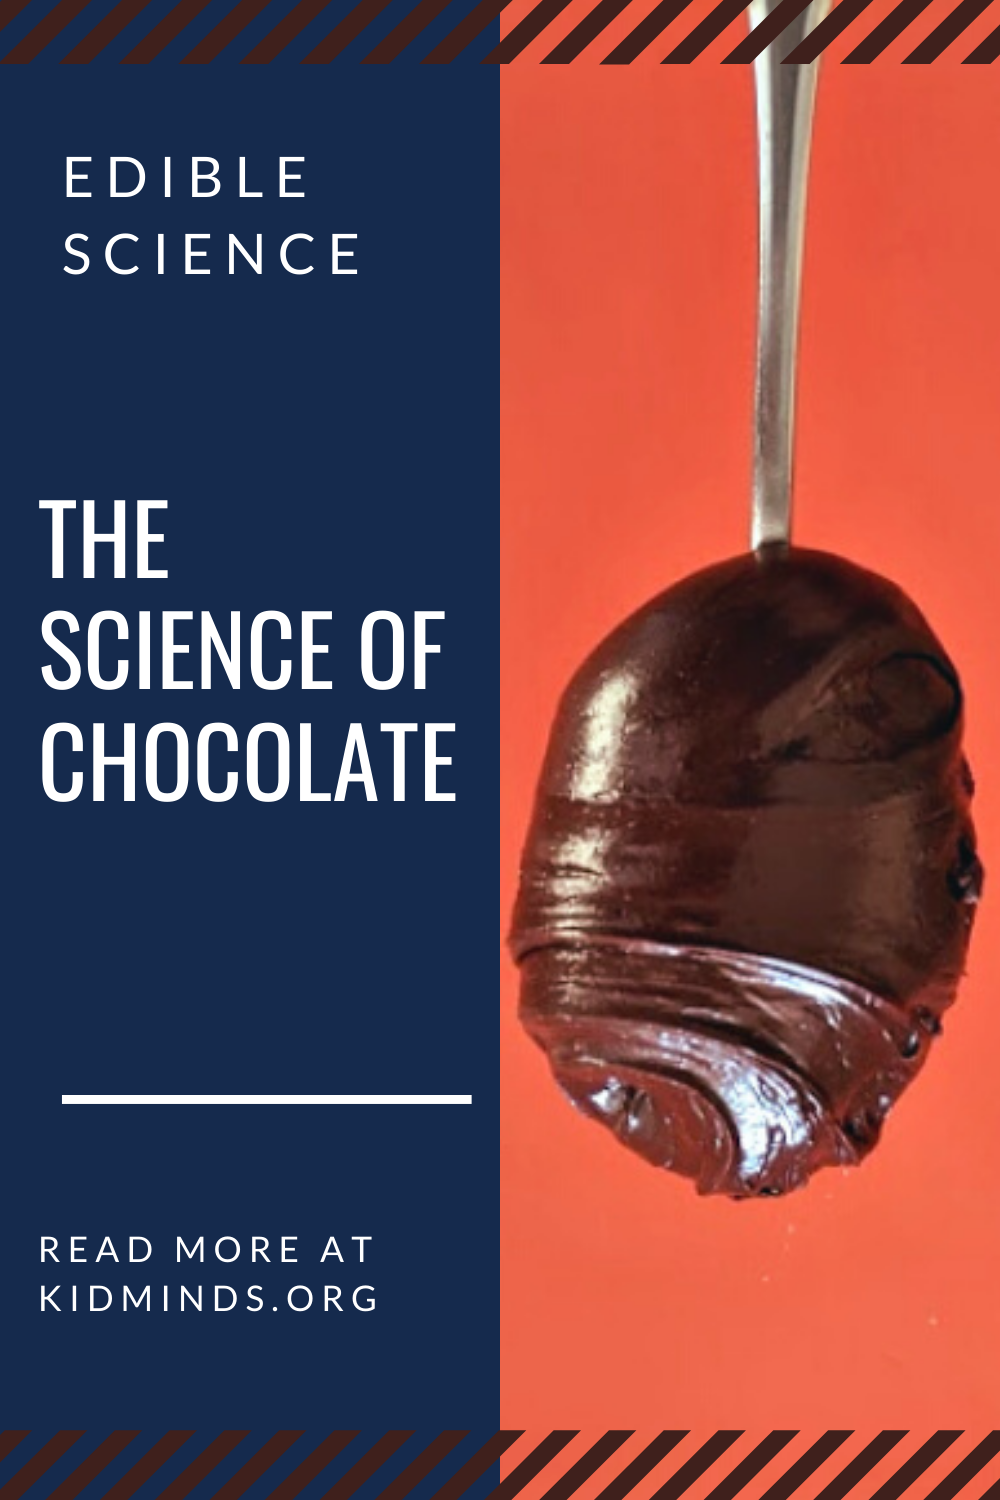 Homemade chocolate frogs that are simple, healthy, and delicious. This is one magical treat you won’t mind indulging in with your little Harry Potter fans. #handsonlearning #science #kidsactivities #HarryPotter #chocolatefrogs